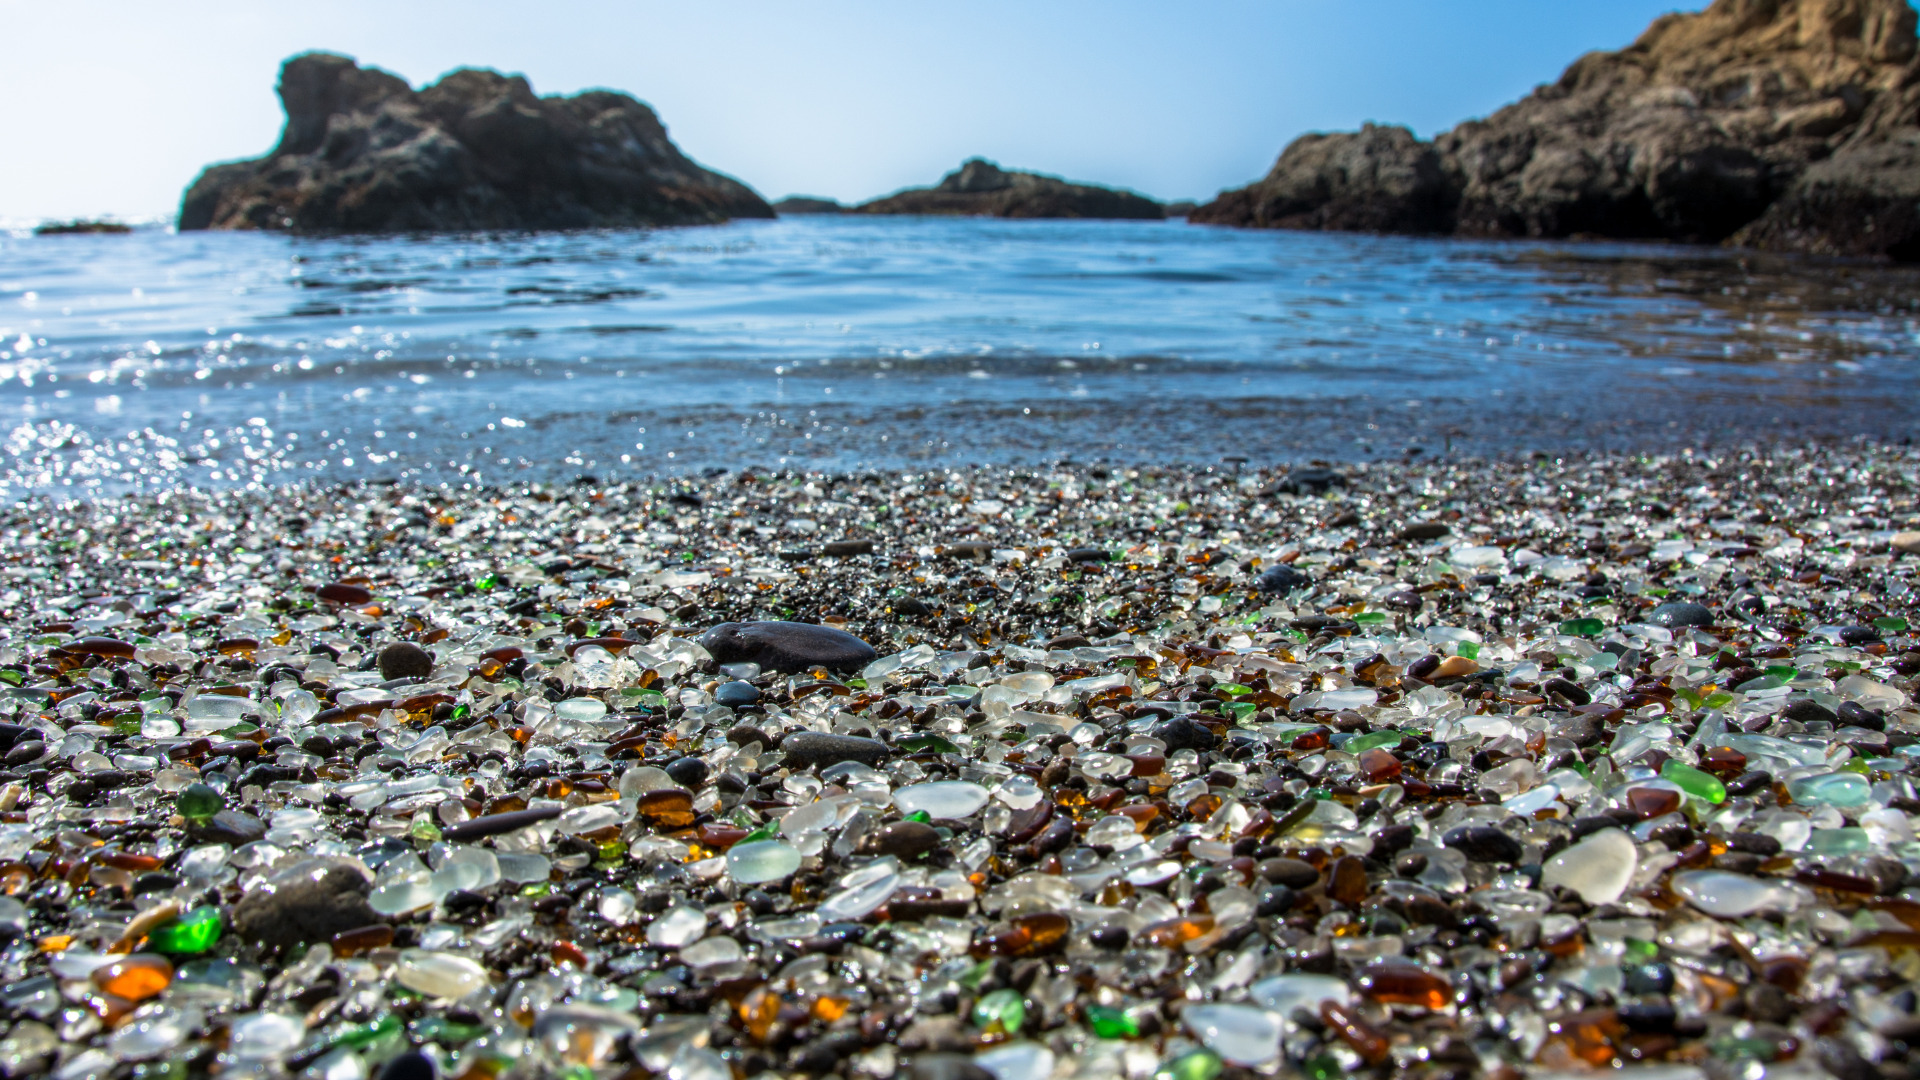 What to Know About California's Glass Beach Before You Go